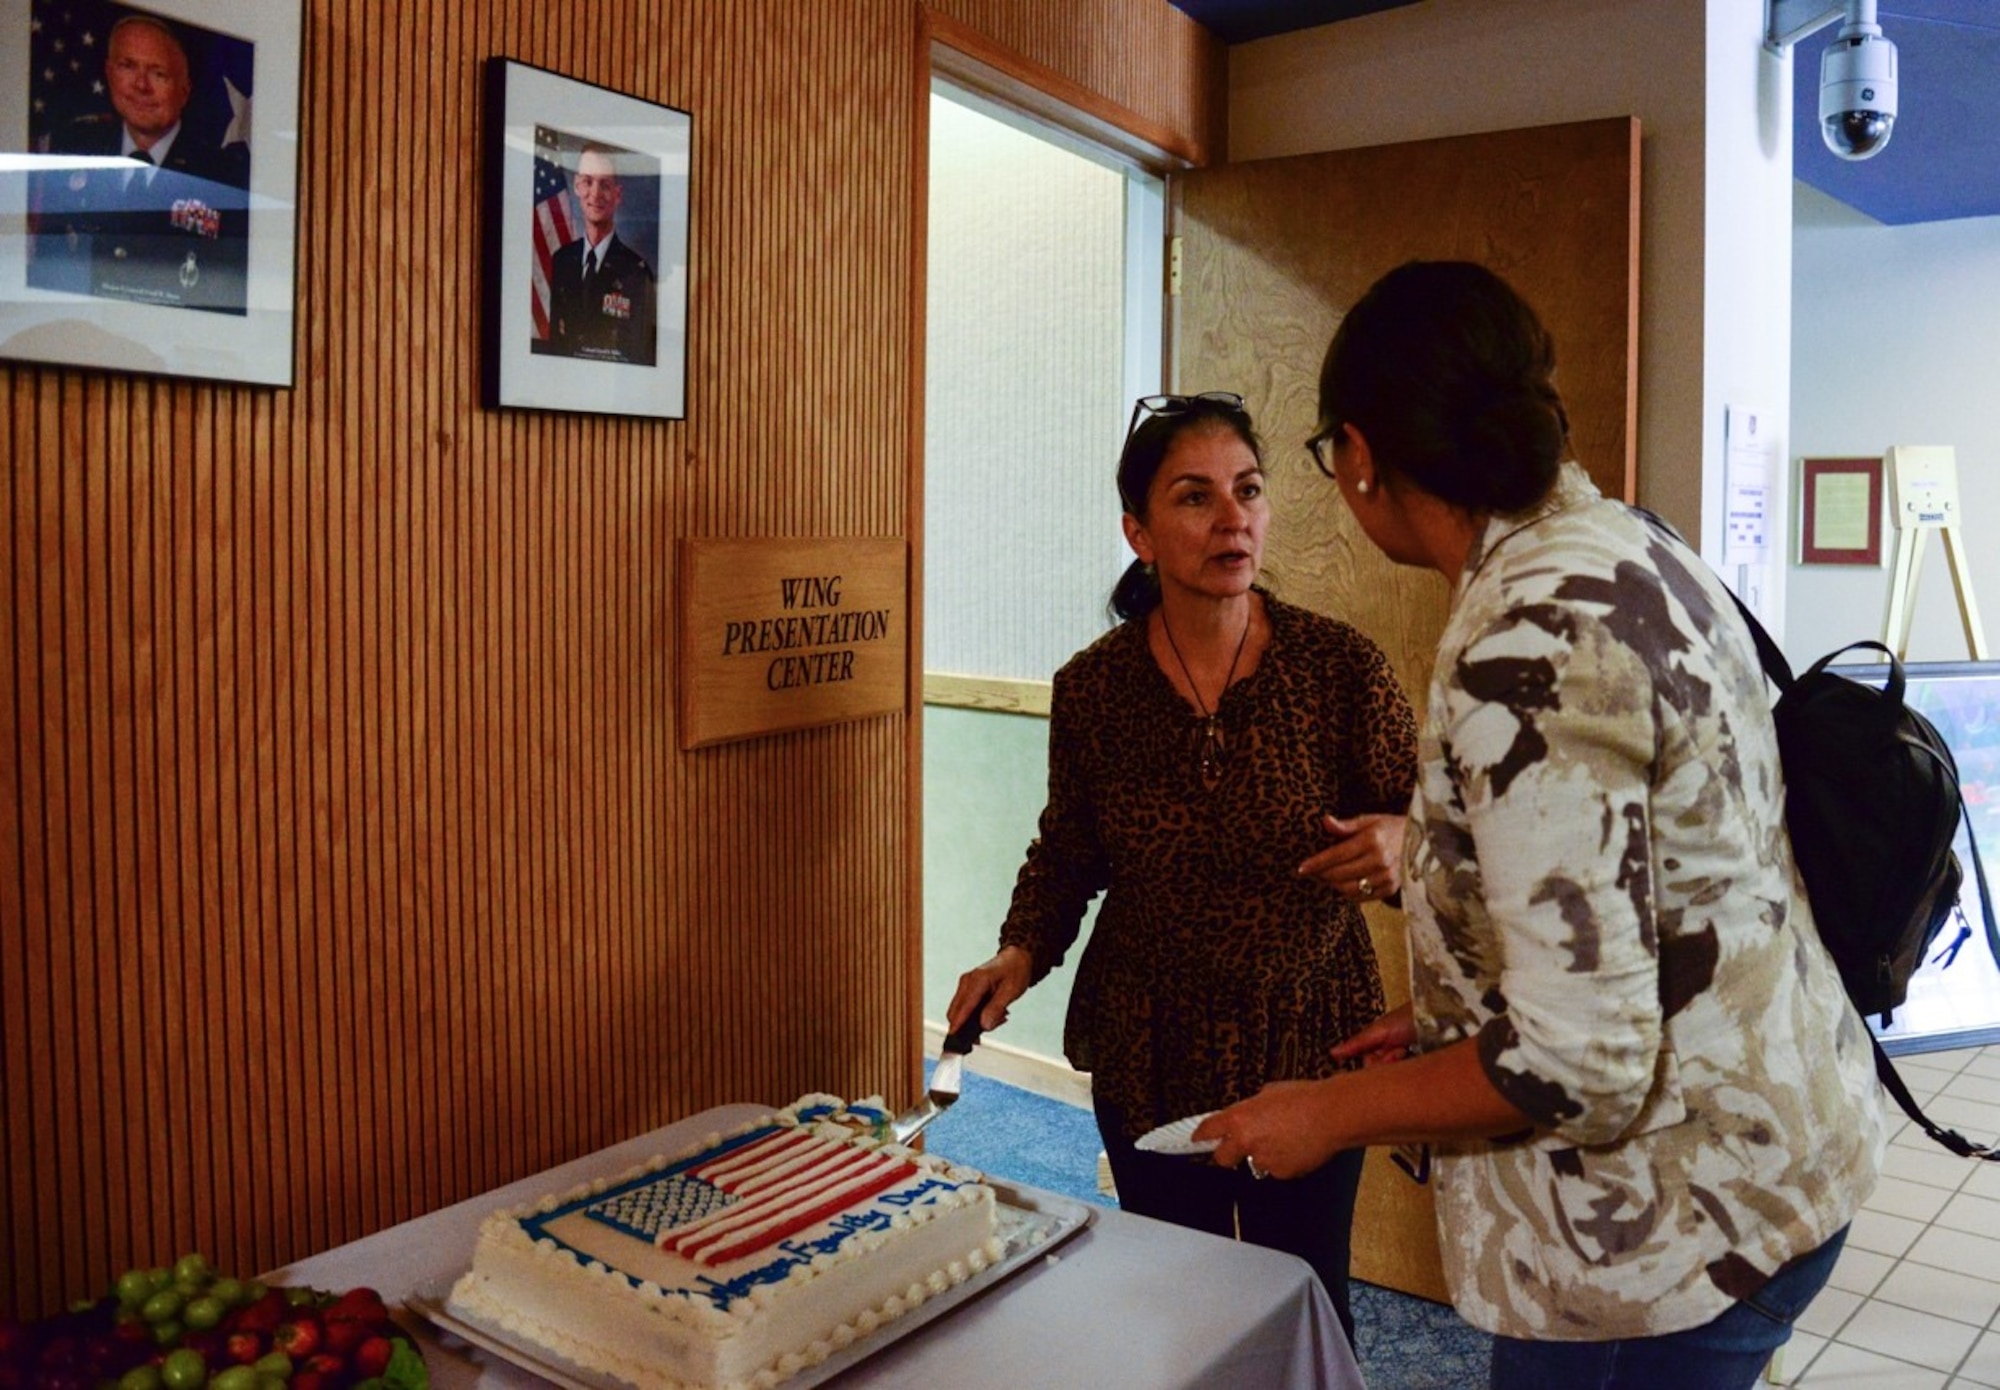 Cindy Dominguez-Trujillo, Special Assistant to the commander on Diversity and Affirmative Employment, cuts the cake during the Women’s Equality Day event at Kirtland Air Force Base, N.M., August 26, 2019. During the event, audience members watched various ‘TED’ talks, and received remarks from the 377th Air Base Wing Commander. (U.S. Air Force photo by Senior Airman Alexandria Crawford)